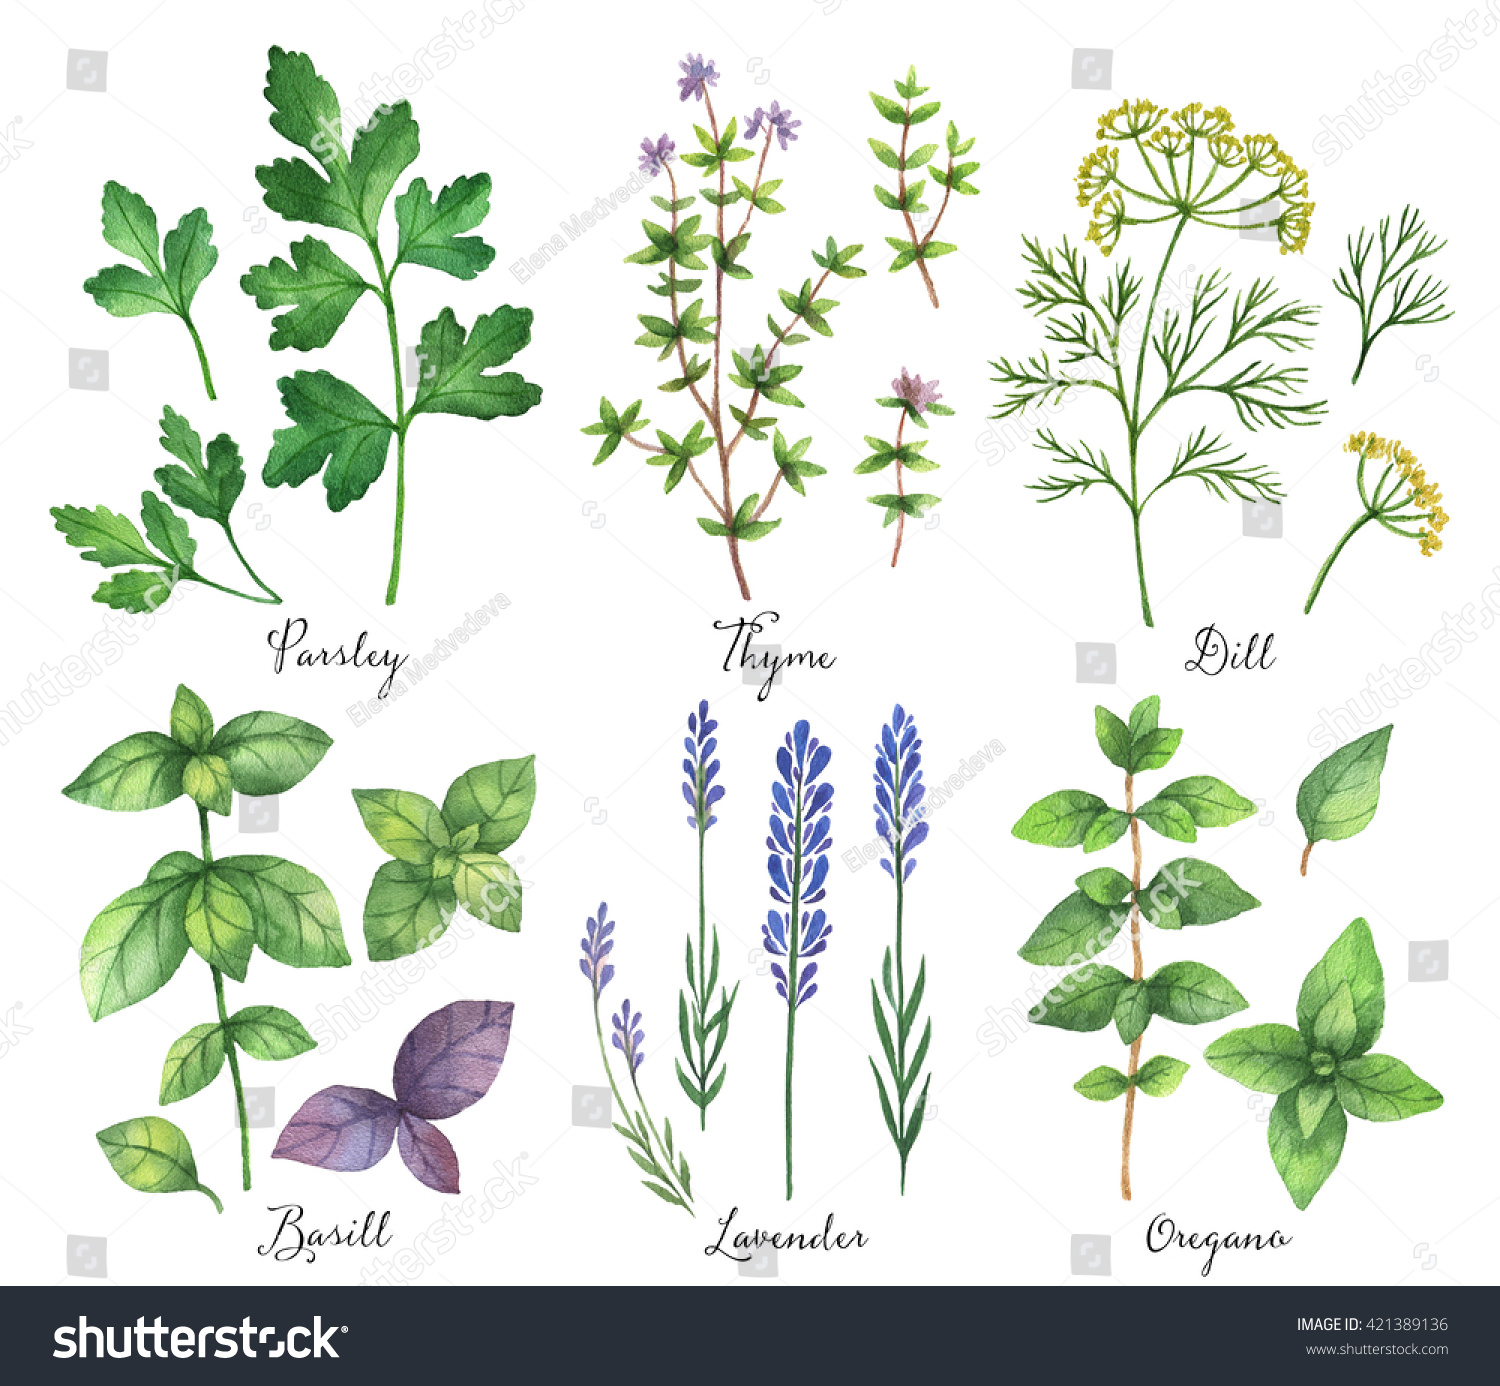 Watercolor Hand Painted Set Wild Herbs Stock Illustration 421389136 ...